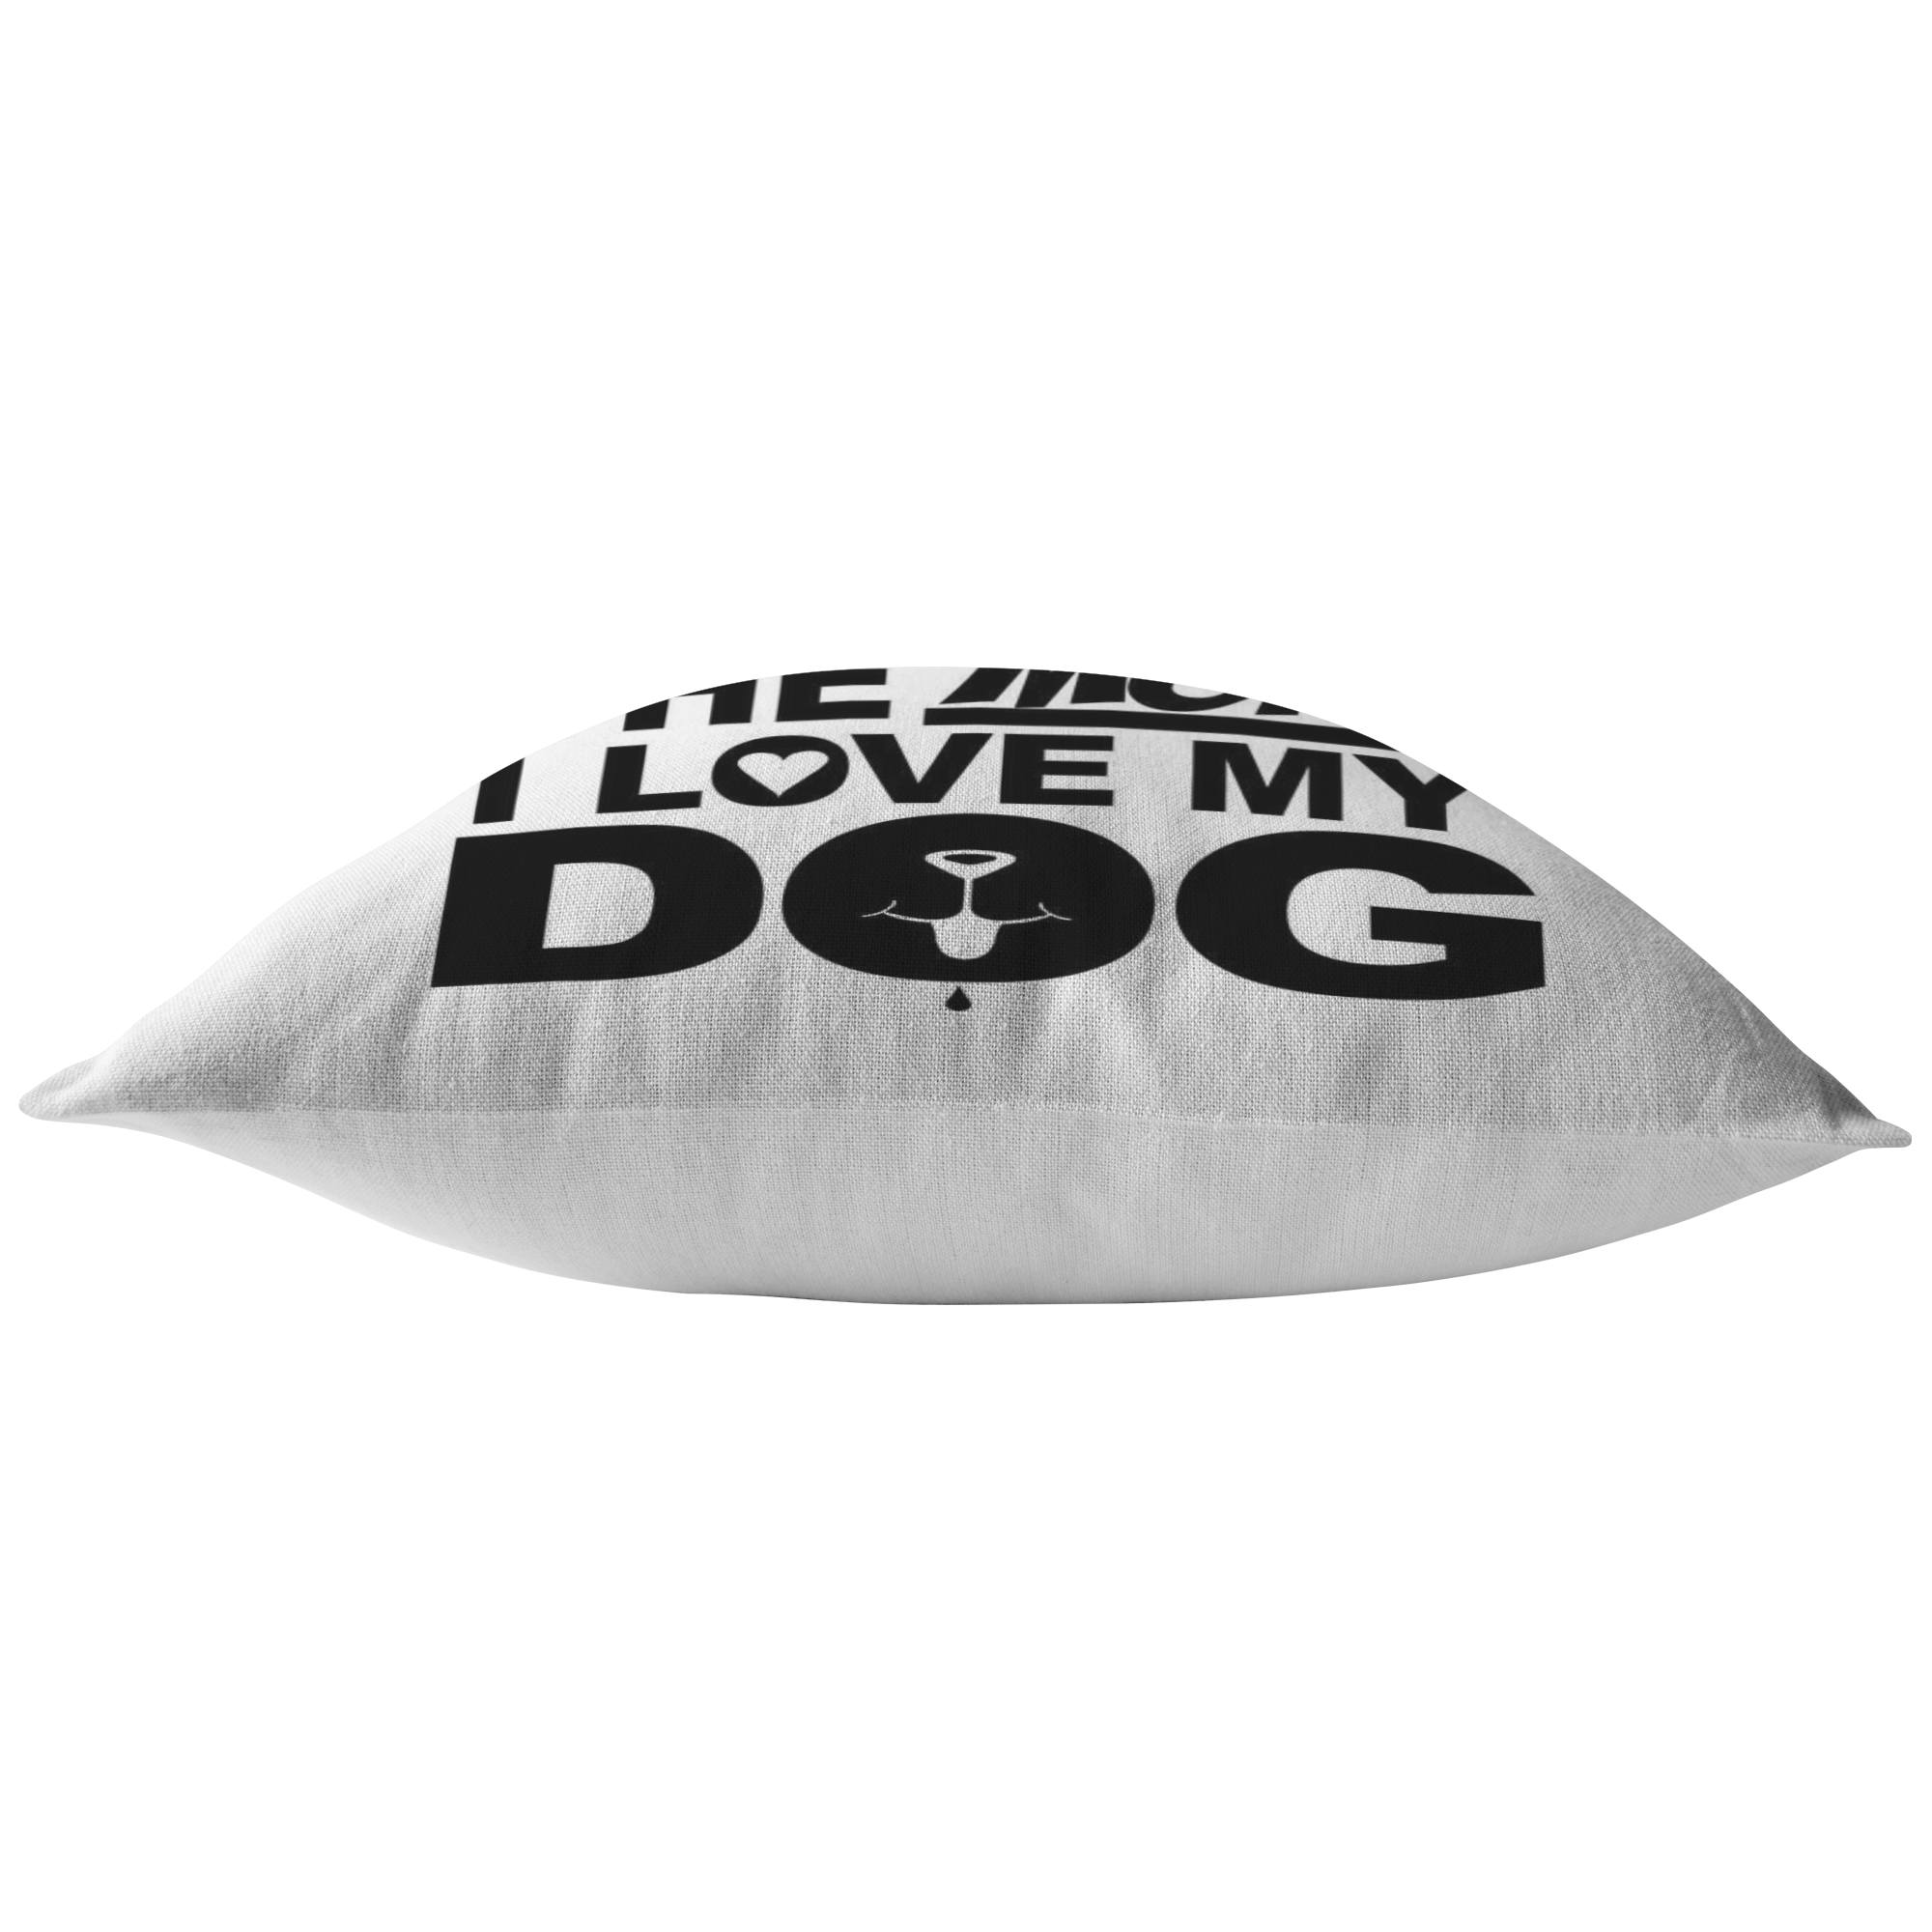 The More People Love Dog - Pillow